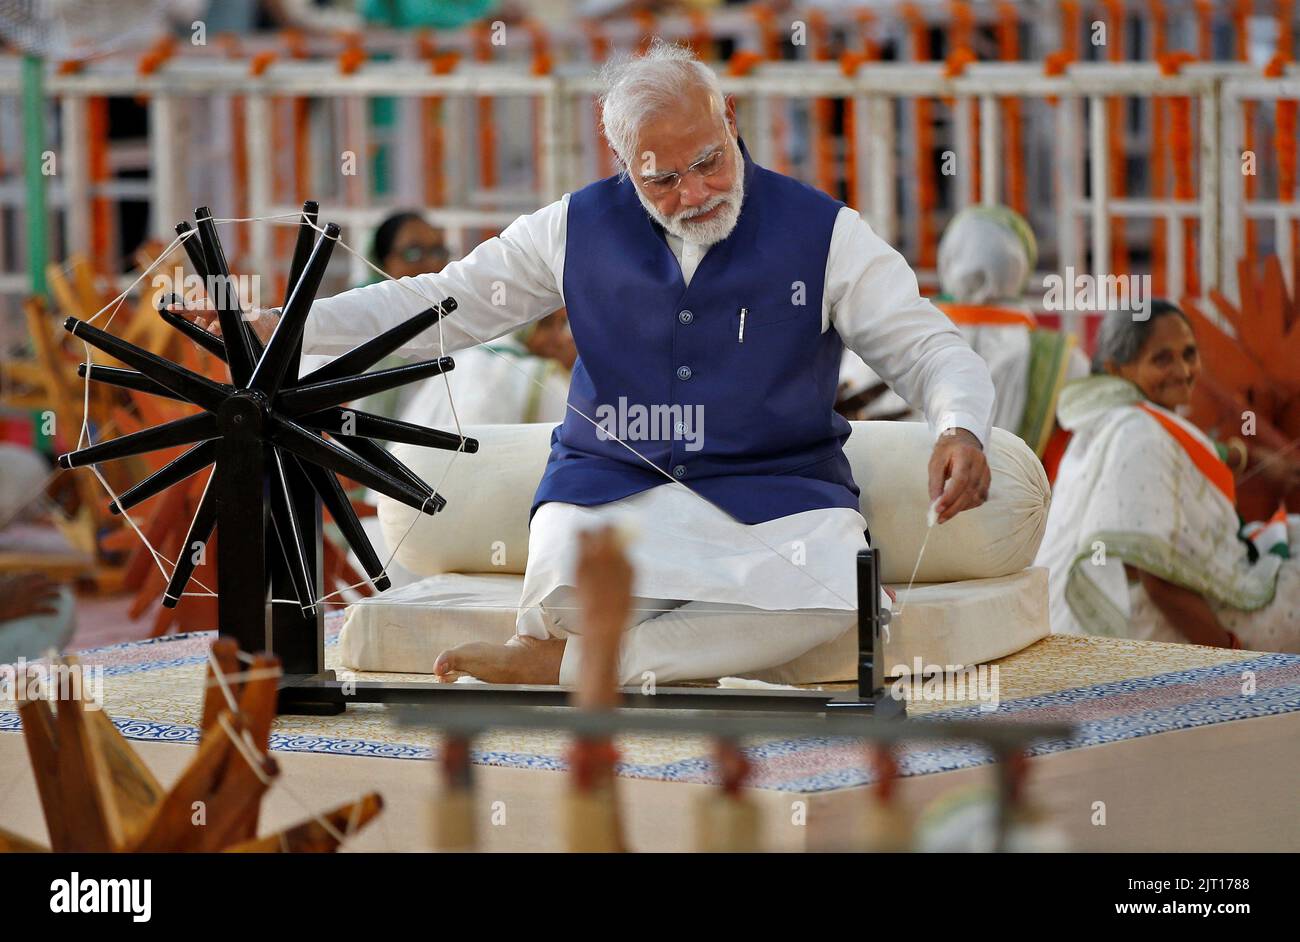 India's Prime Minister Narendra Modi spins cotton on a wheel during an event where 7500 artisans spin cotton live at same place to promote hand woven cotton cloth as part of the celebrations commemorating 75 years of India's Independence, in Ahmedabad, India, August 27, 2022. REUTERS/Amit Dave Stock Photo